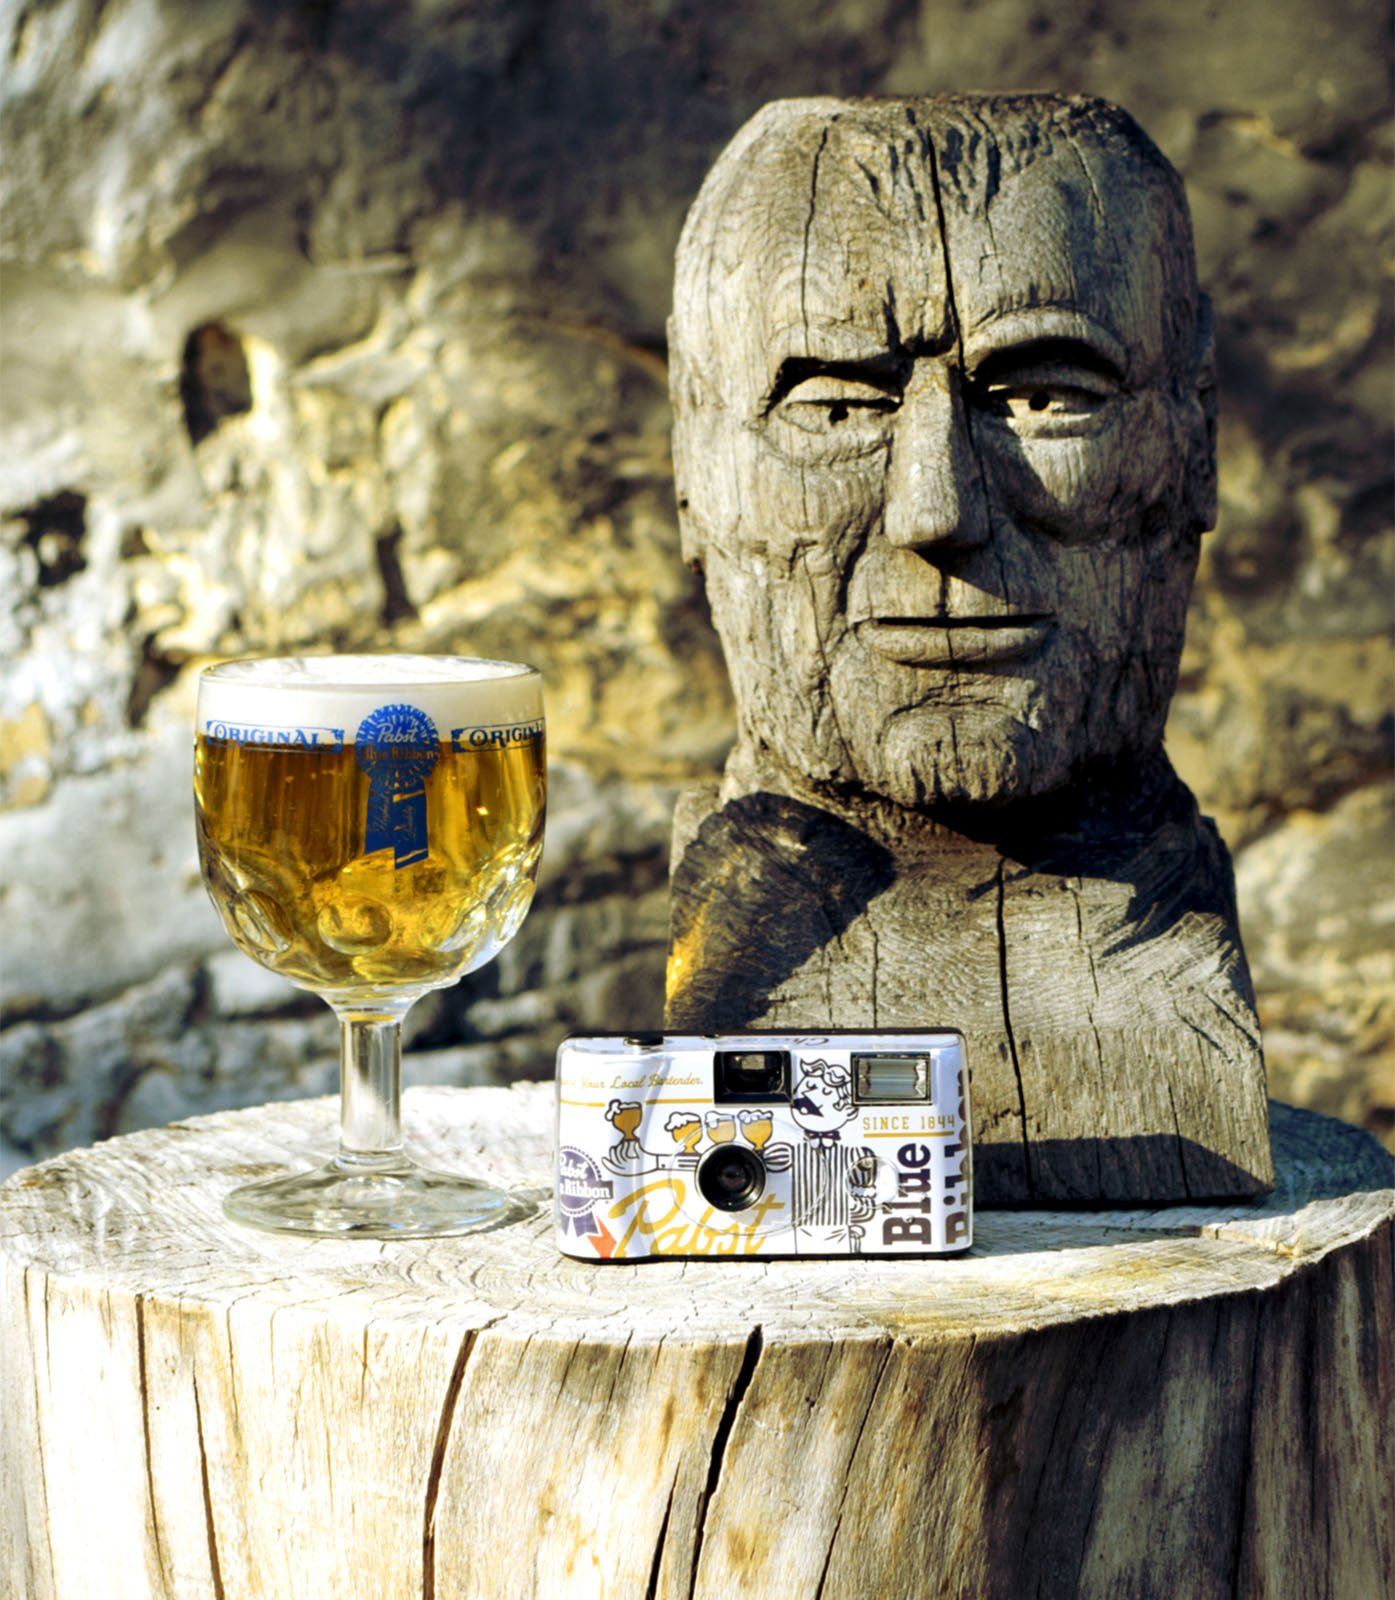 A wooden bust of a man's head, a glass of beer with a frothy top, and a decorated camera are displayed on a cut tree stump against a stone wall.